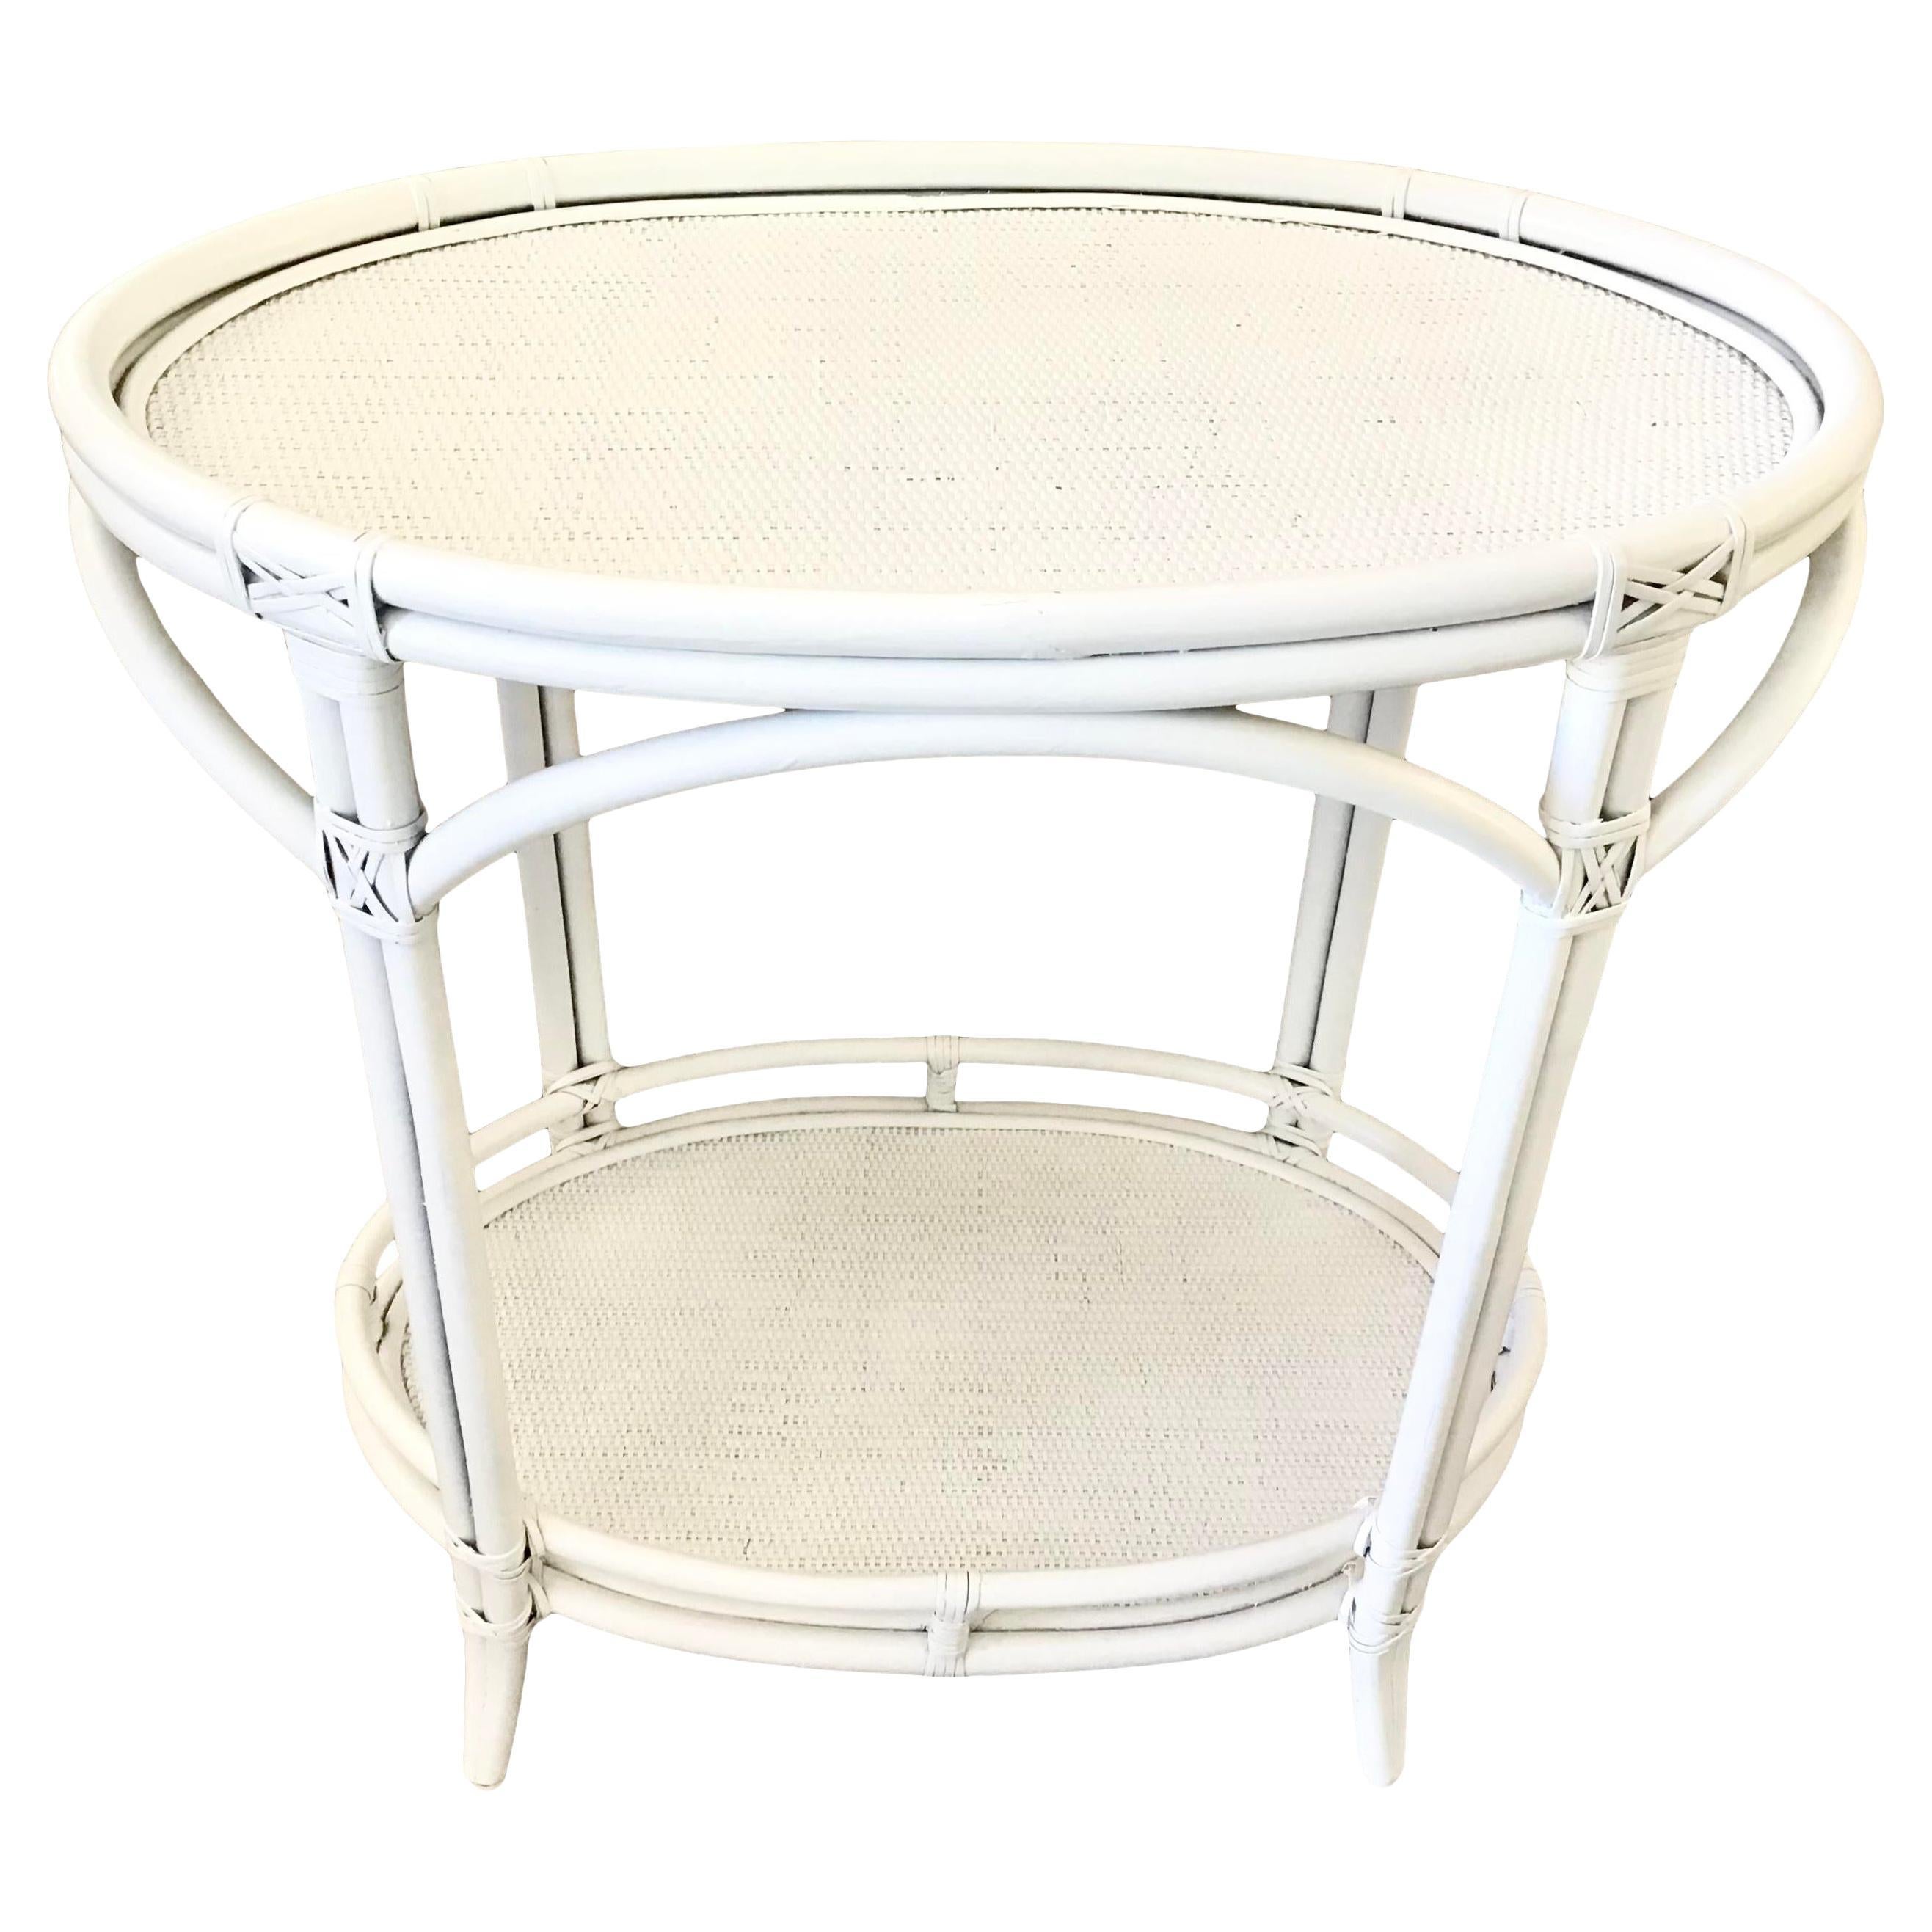 Boho Chic Oval Rattan Bar Table White Lacquer